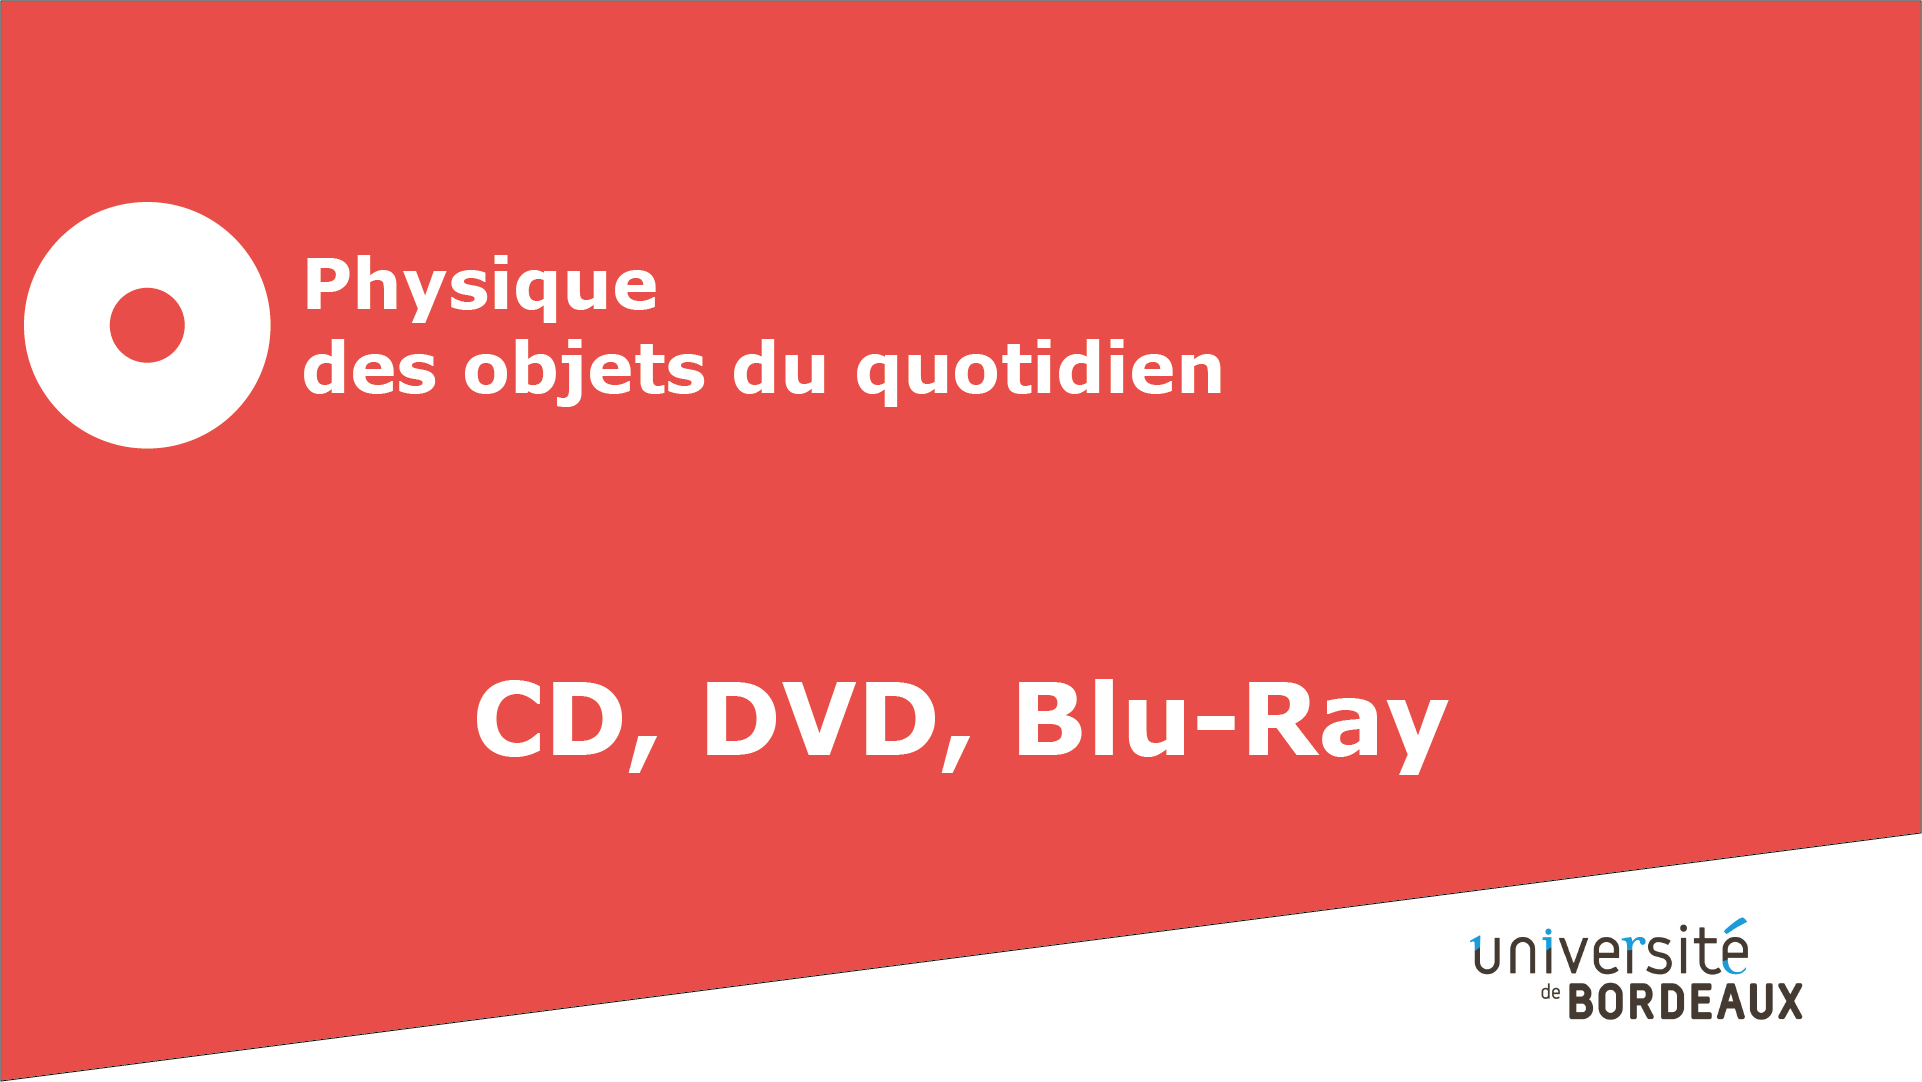 15 - CD, DVD, Blu-ray / Les supports de stockage optique